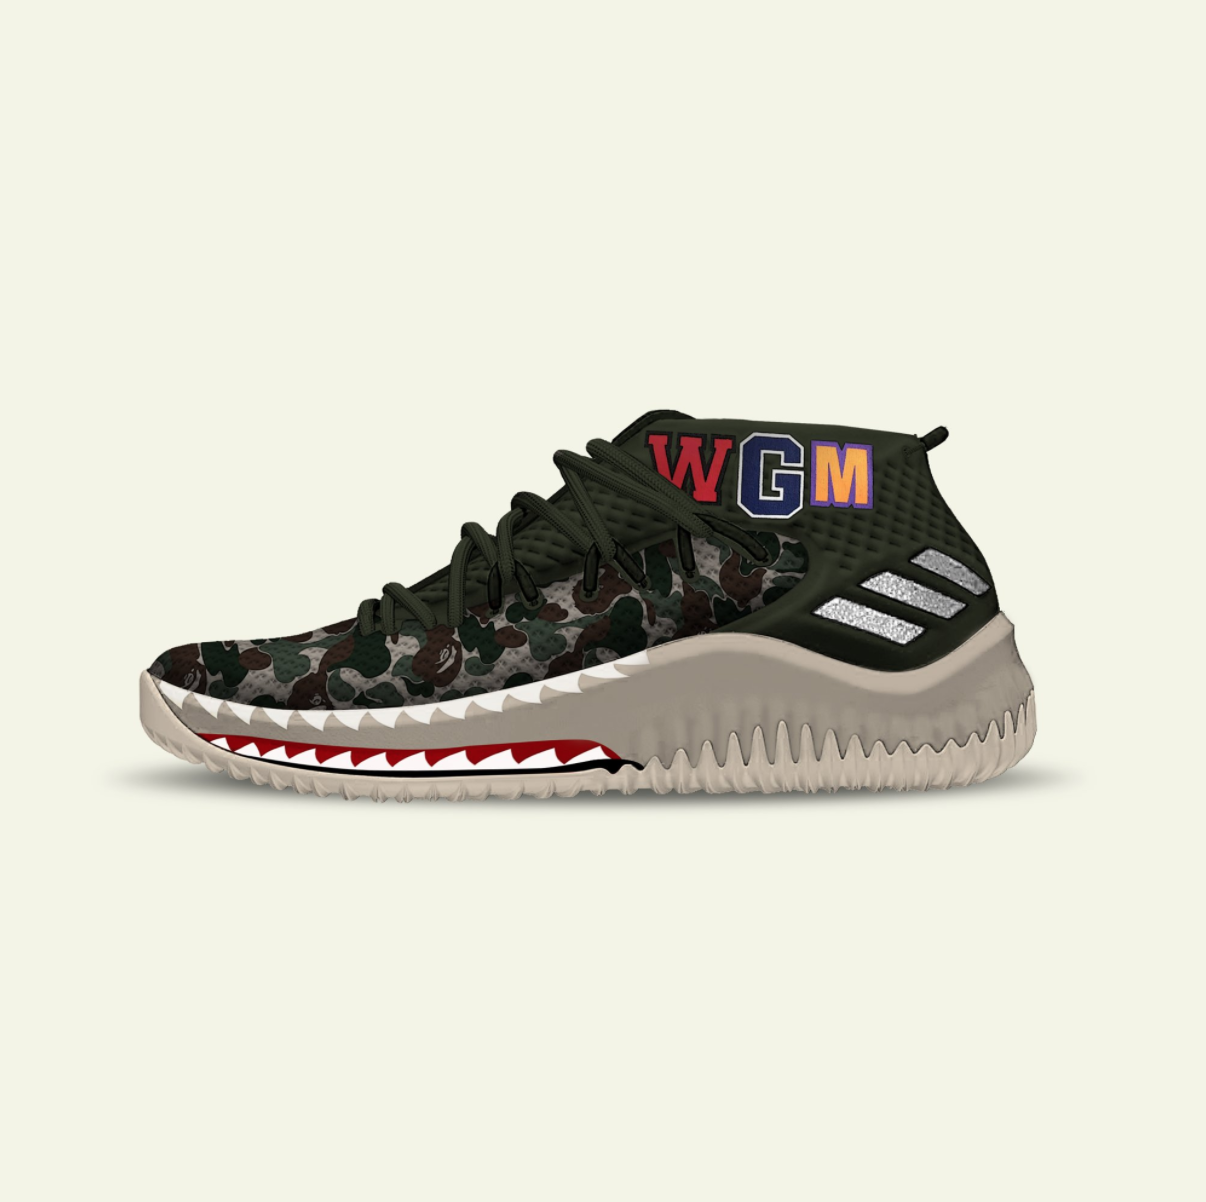 Prematuro Implementar cuidadosamente A Third BAPE x adidas Dame 4 Exists, But You Probably Won't Be Able to Grab  It - WearTesters